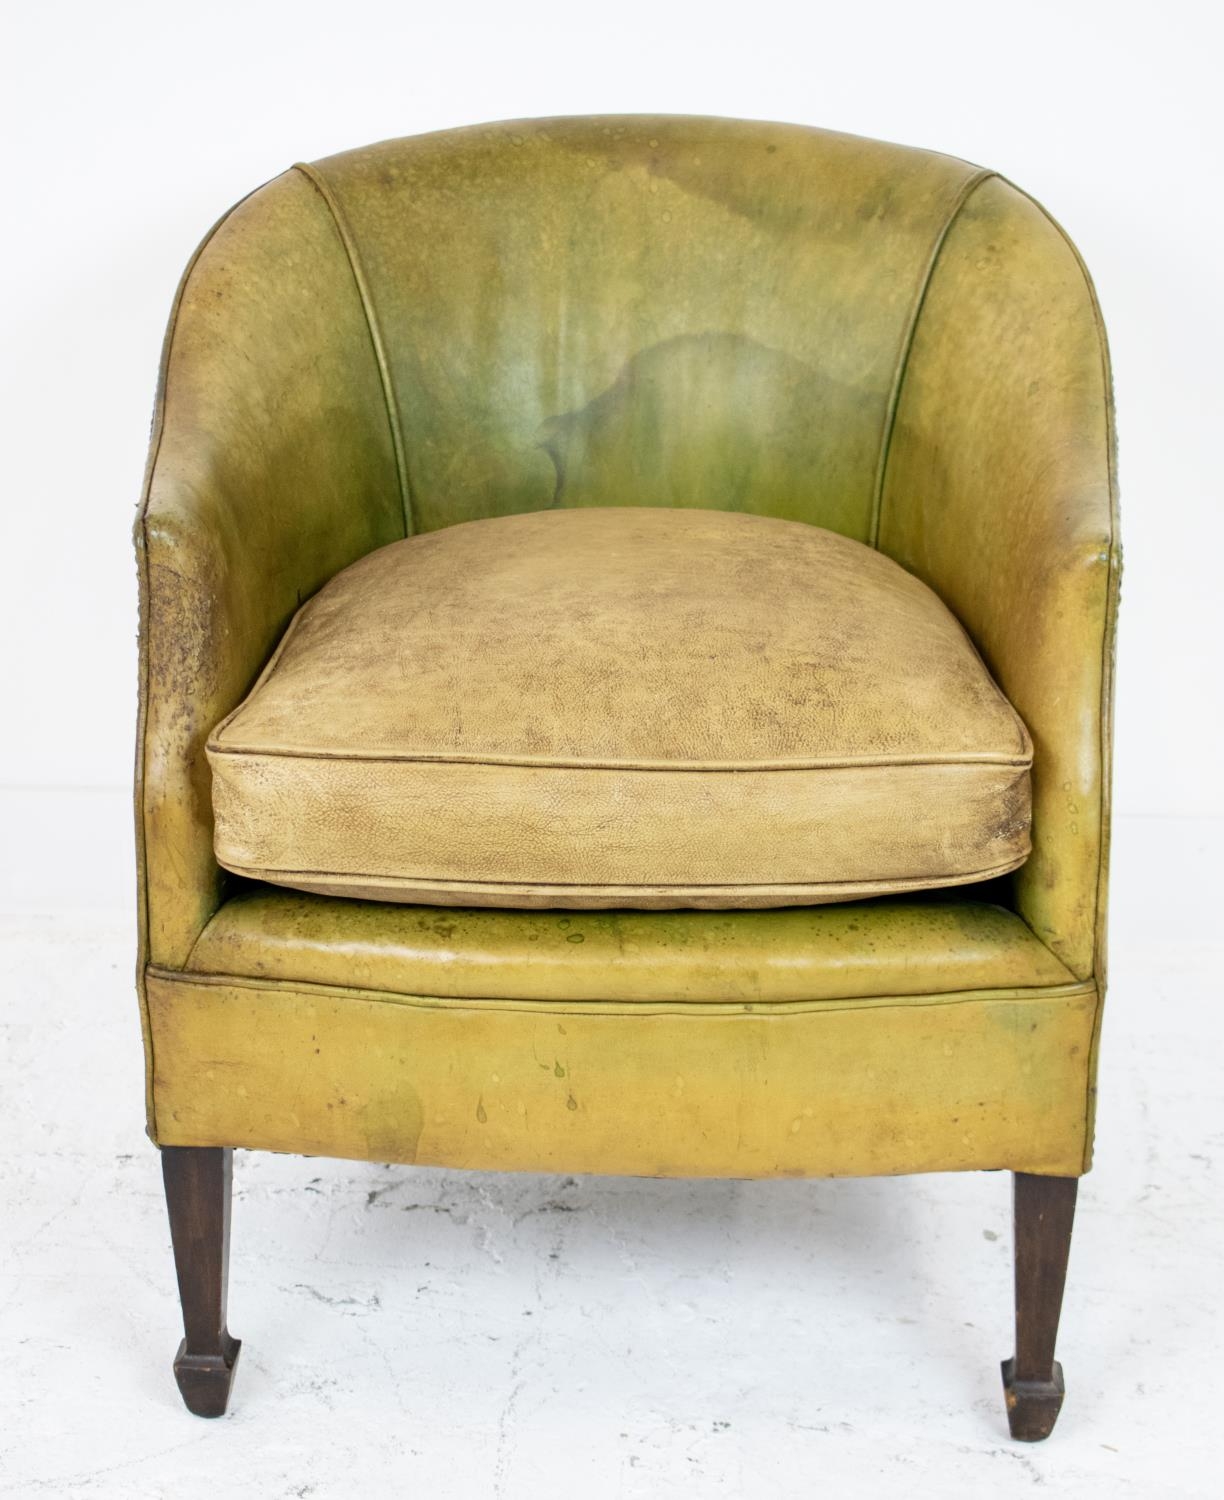 TUB CHAIR, Edwardian in leather with cushion seat, 74cm x 61cm x 65cm. - Image 2 of 4